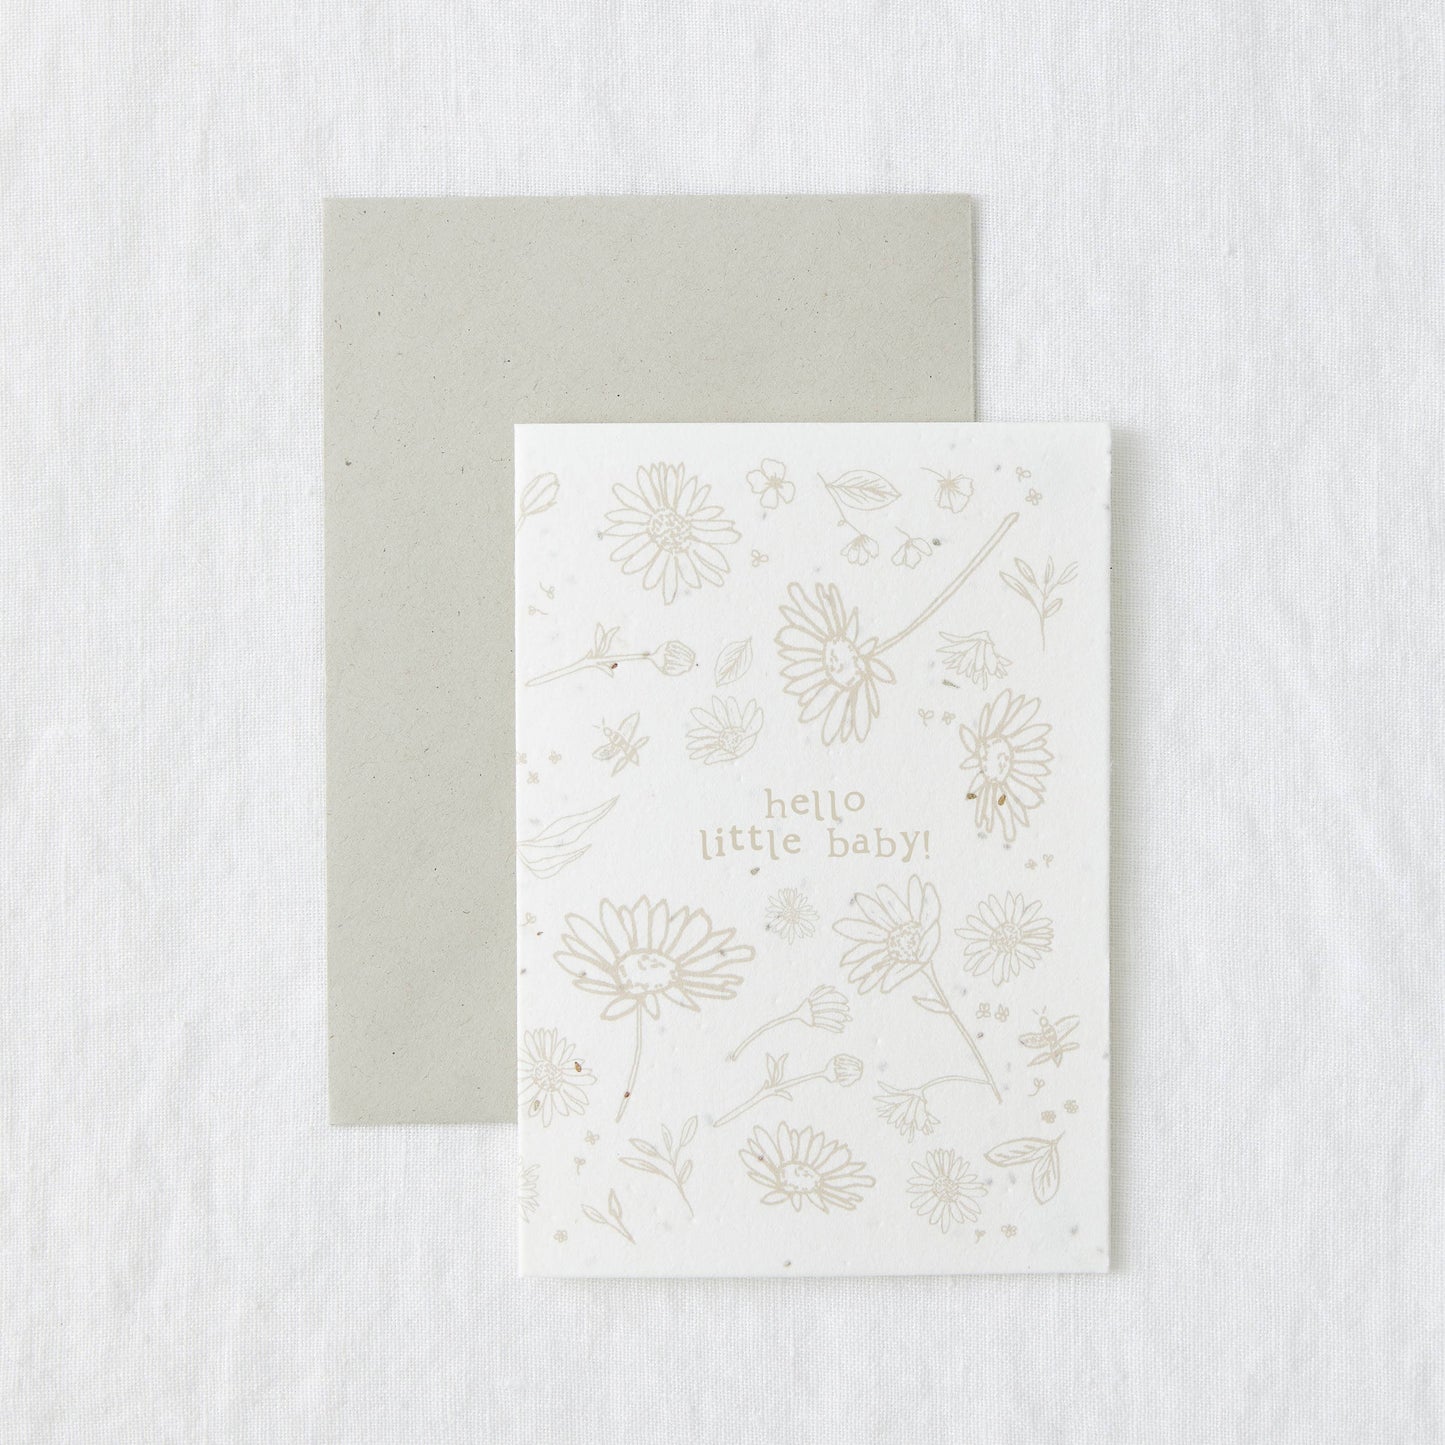 Little Baby - Daisy Seed Plantable Greeting Card